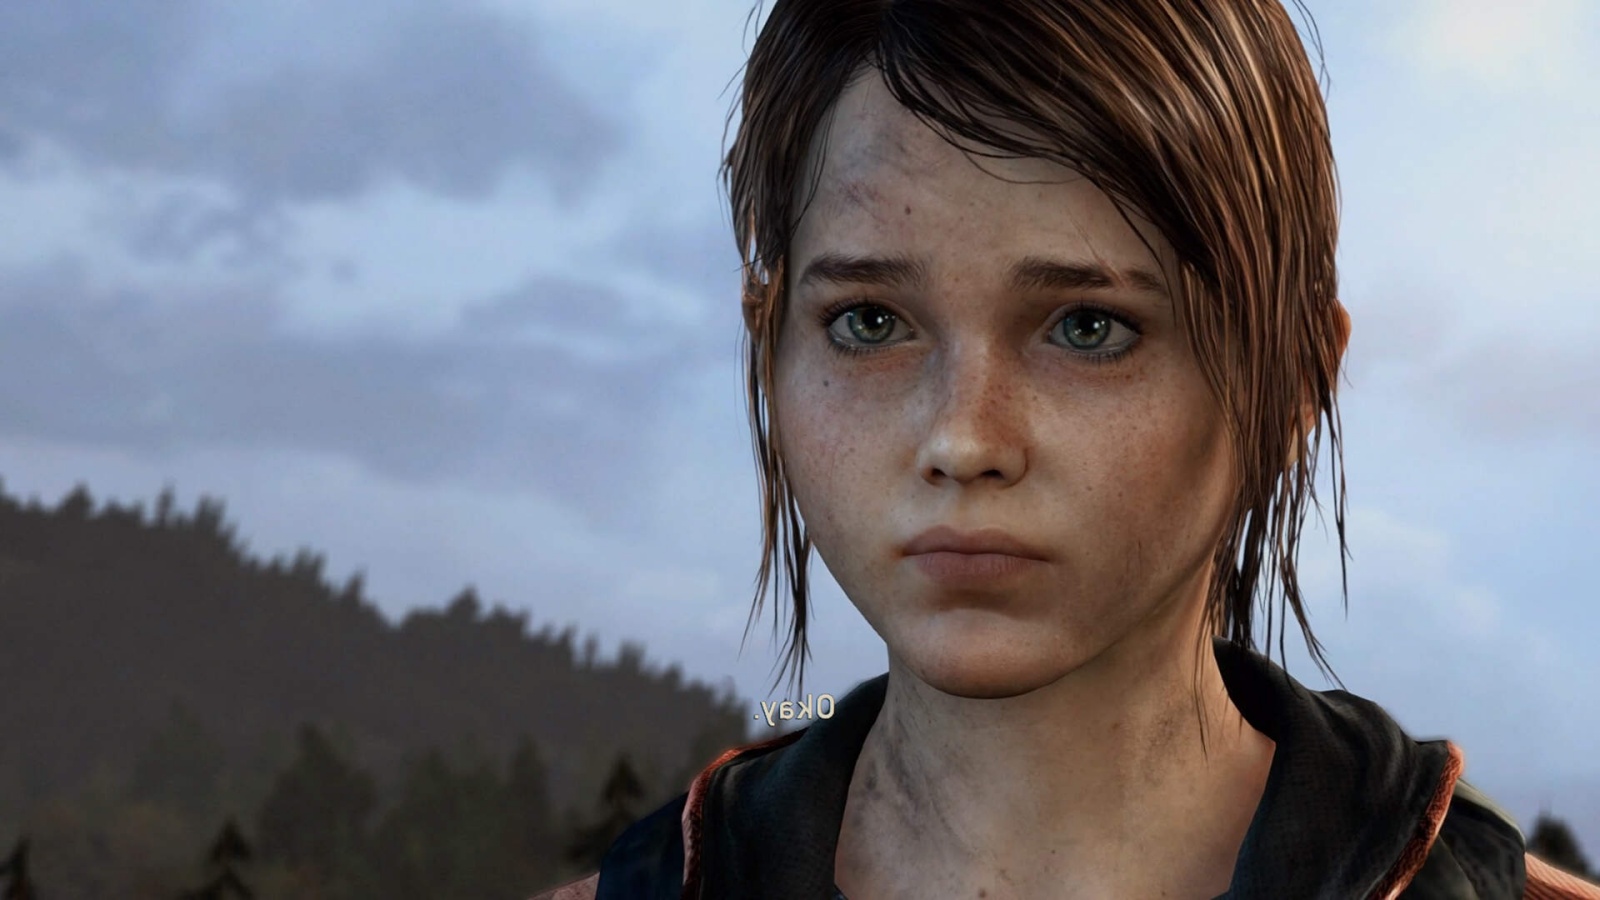 The Last of Us PS5 remake release date set for September, PC later - Polygon